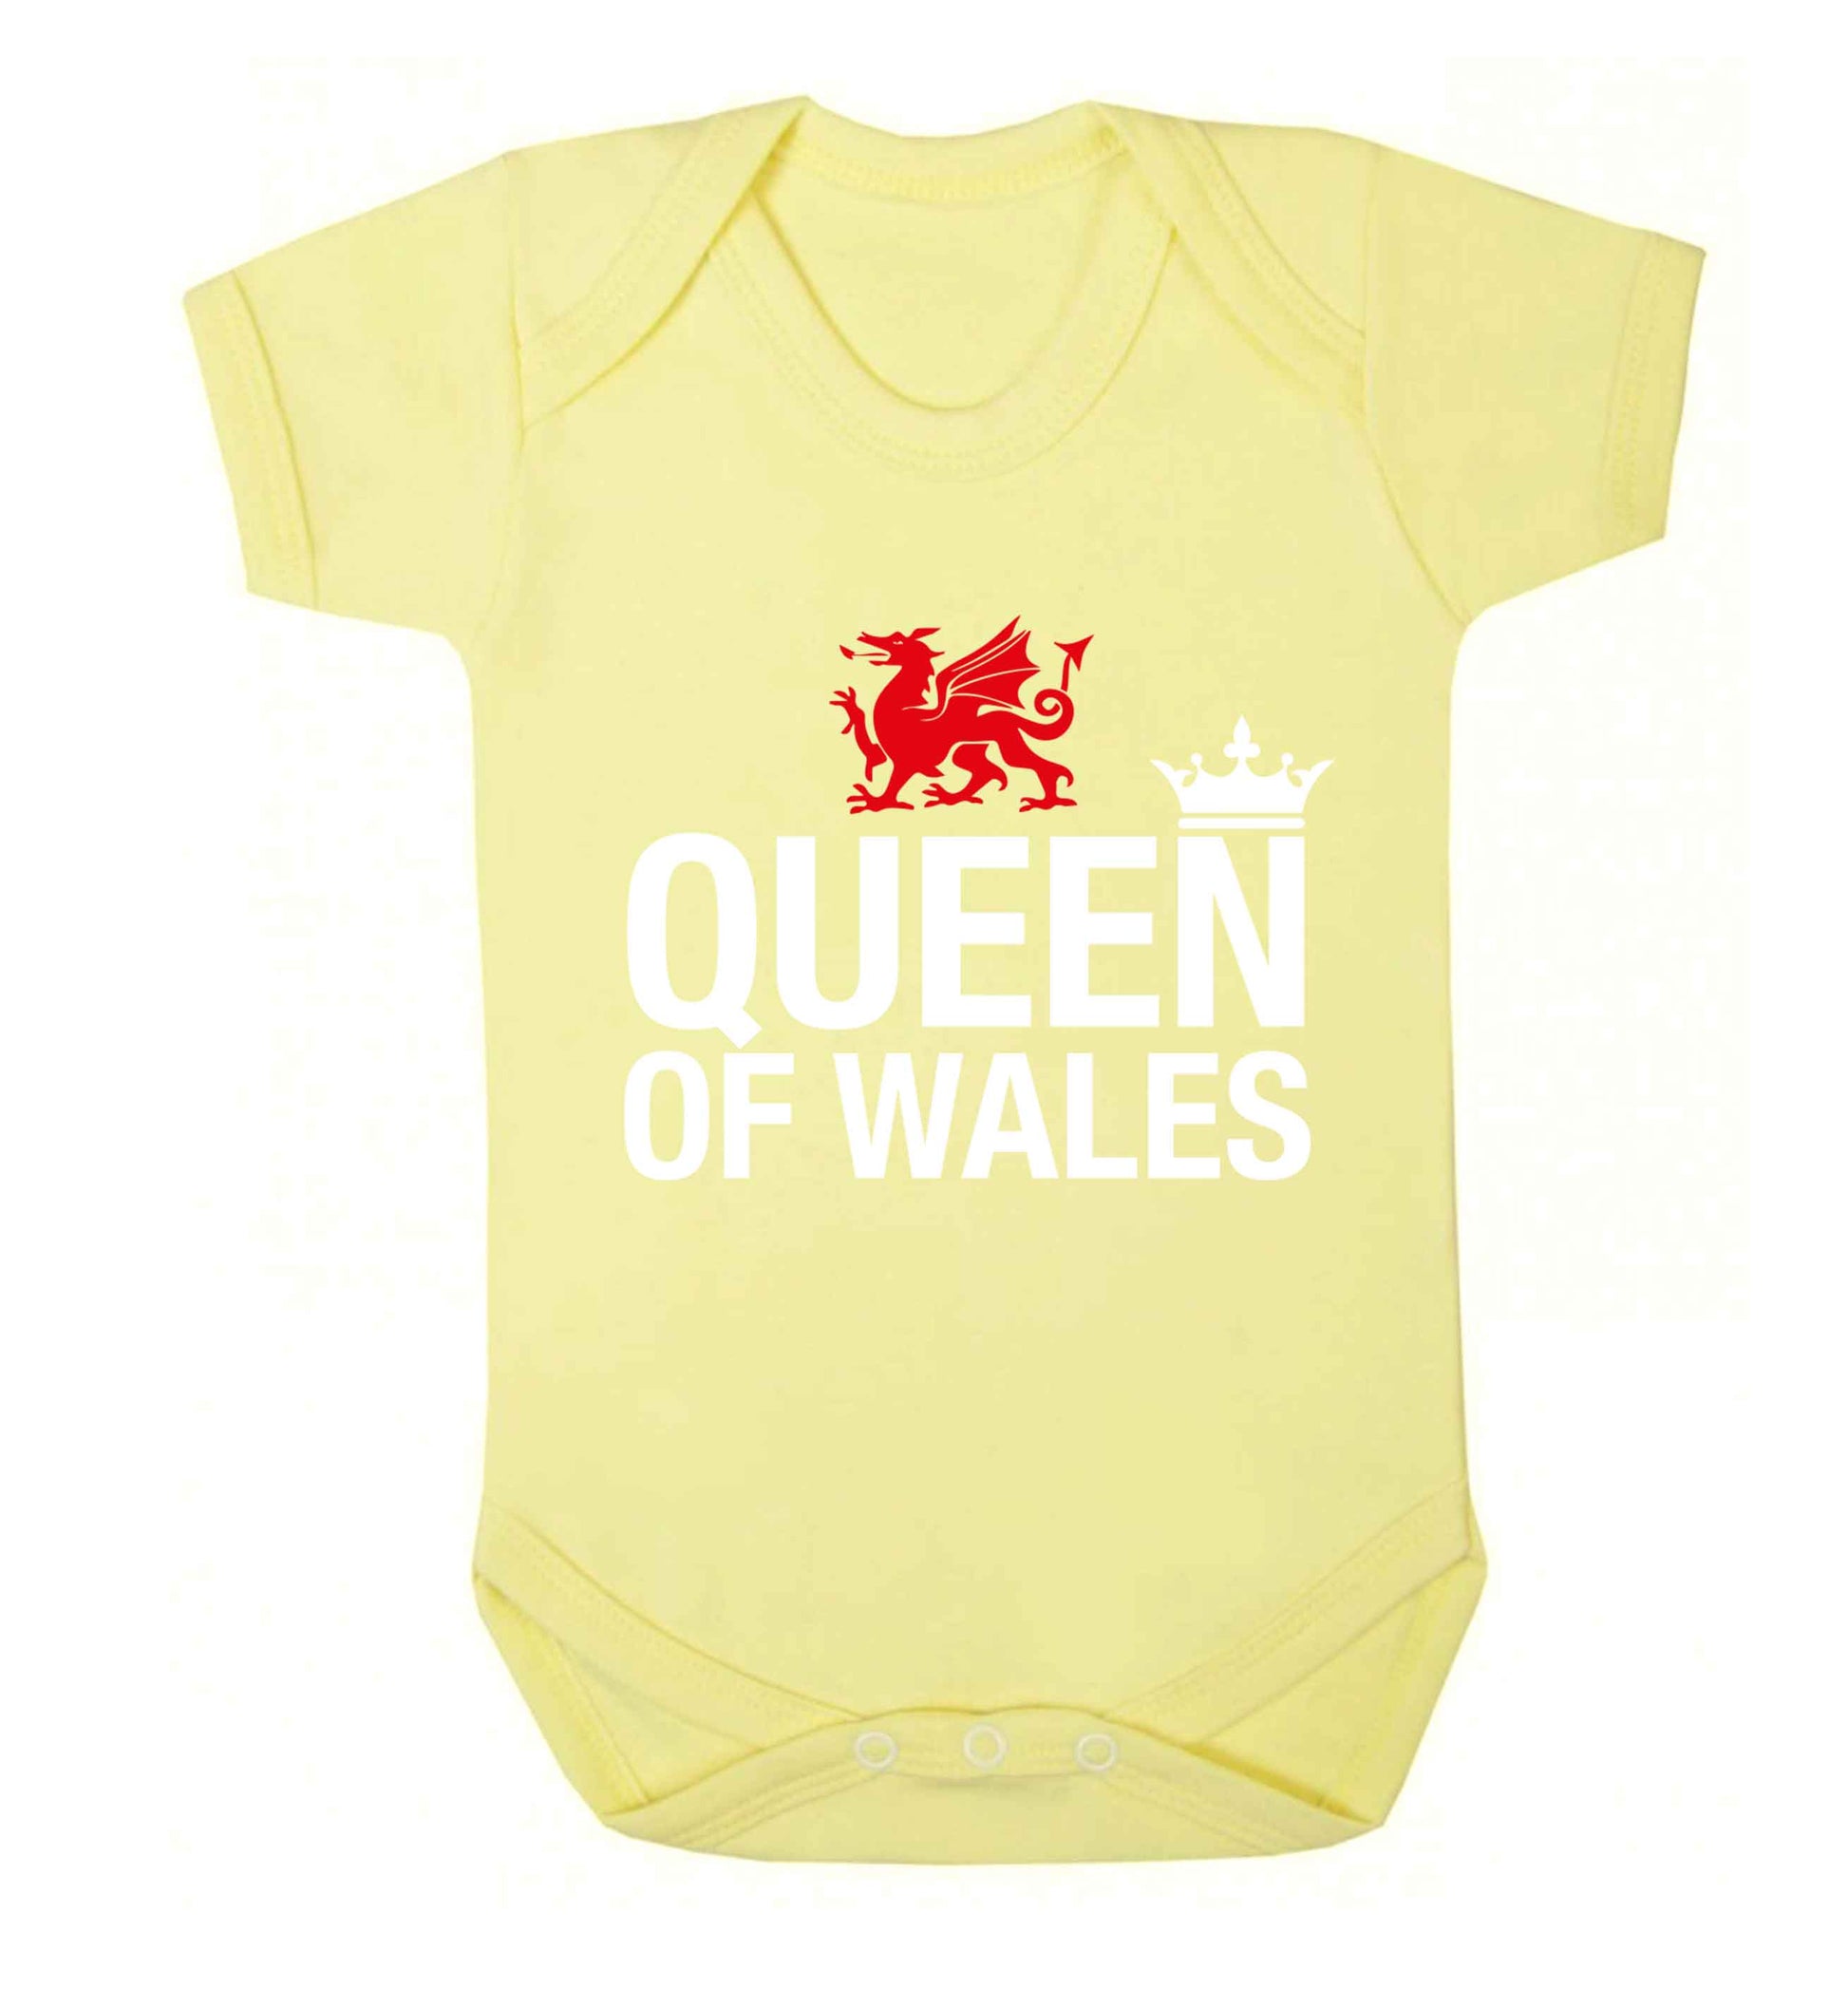 Queen of Wales Baby Vest pale yellow 18-24 months